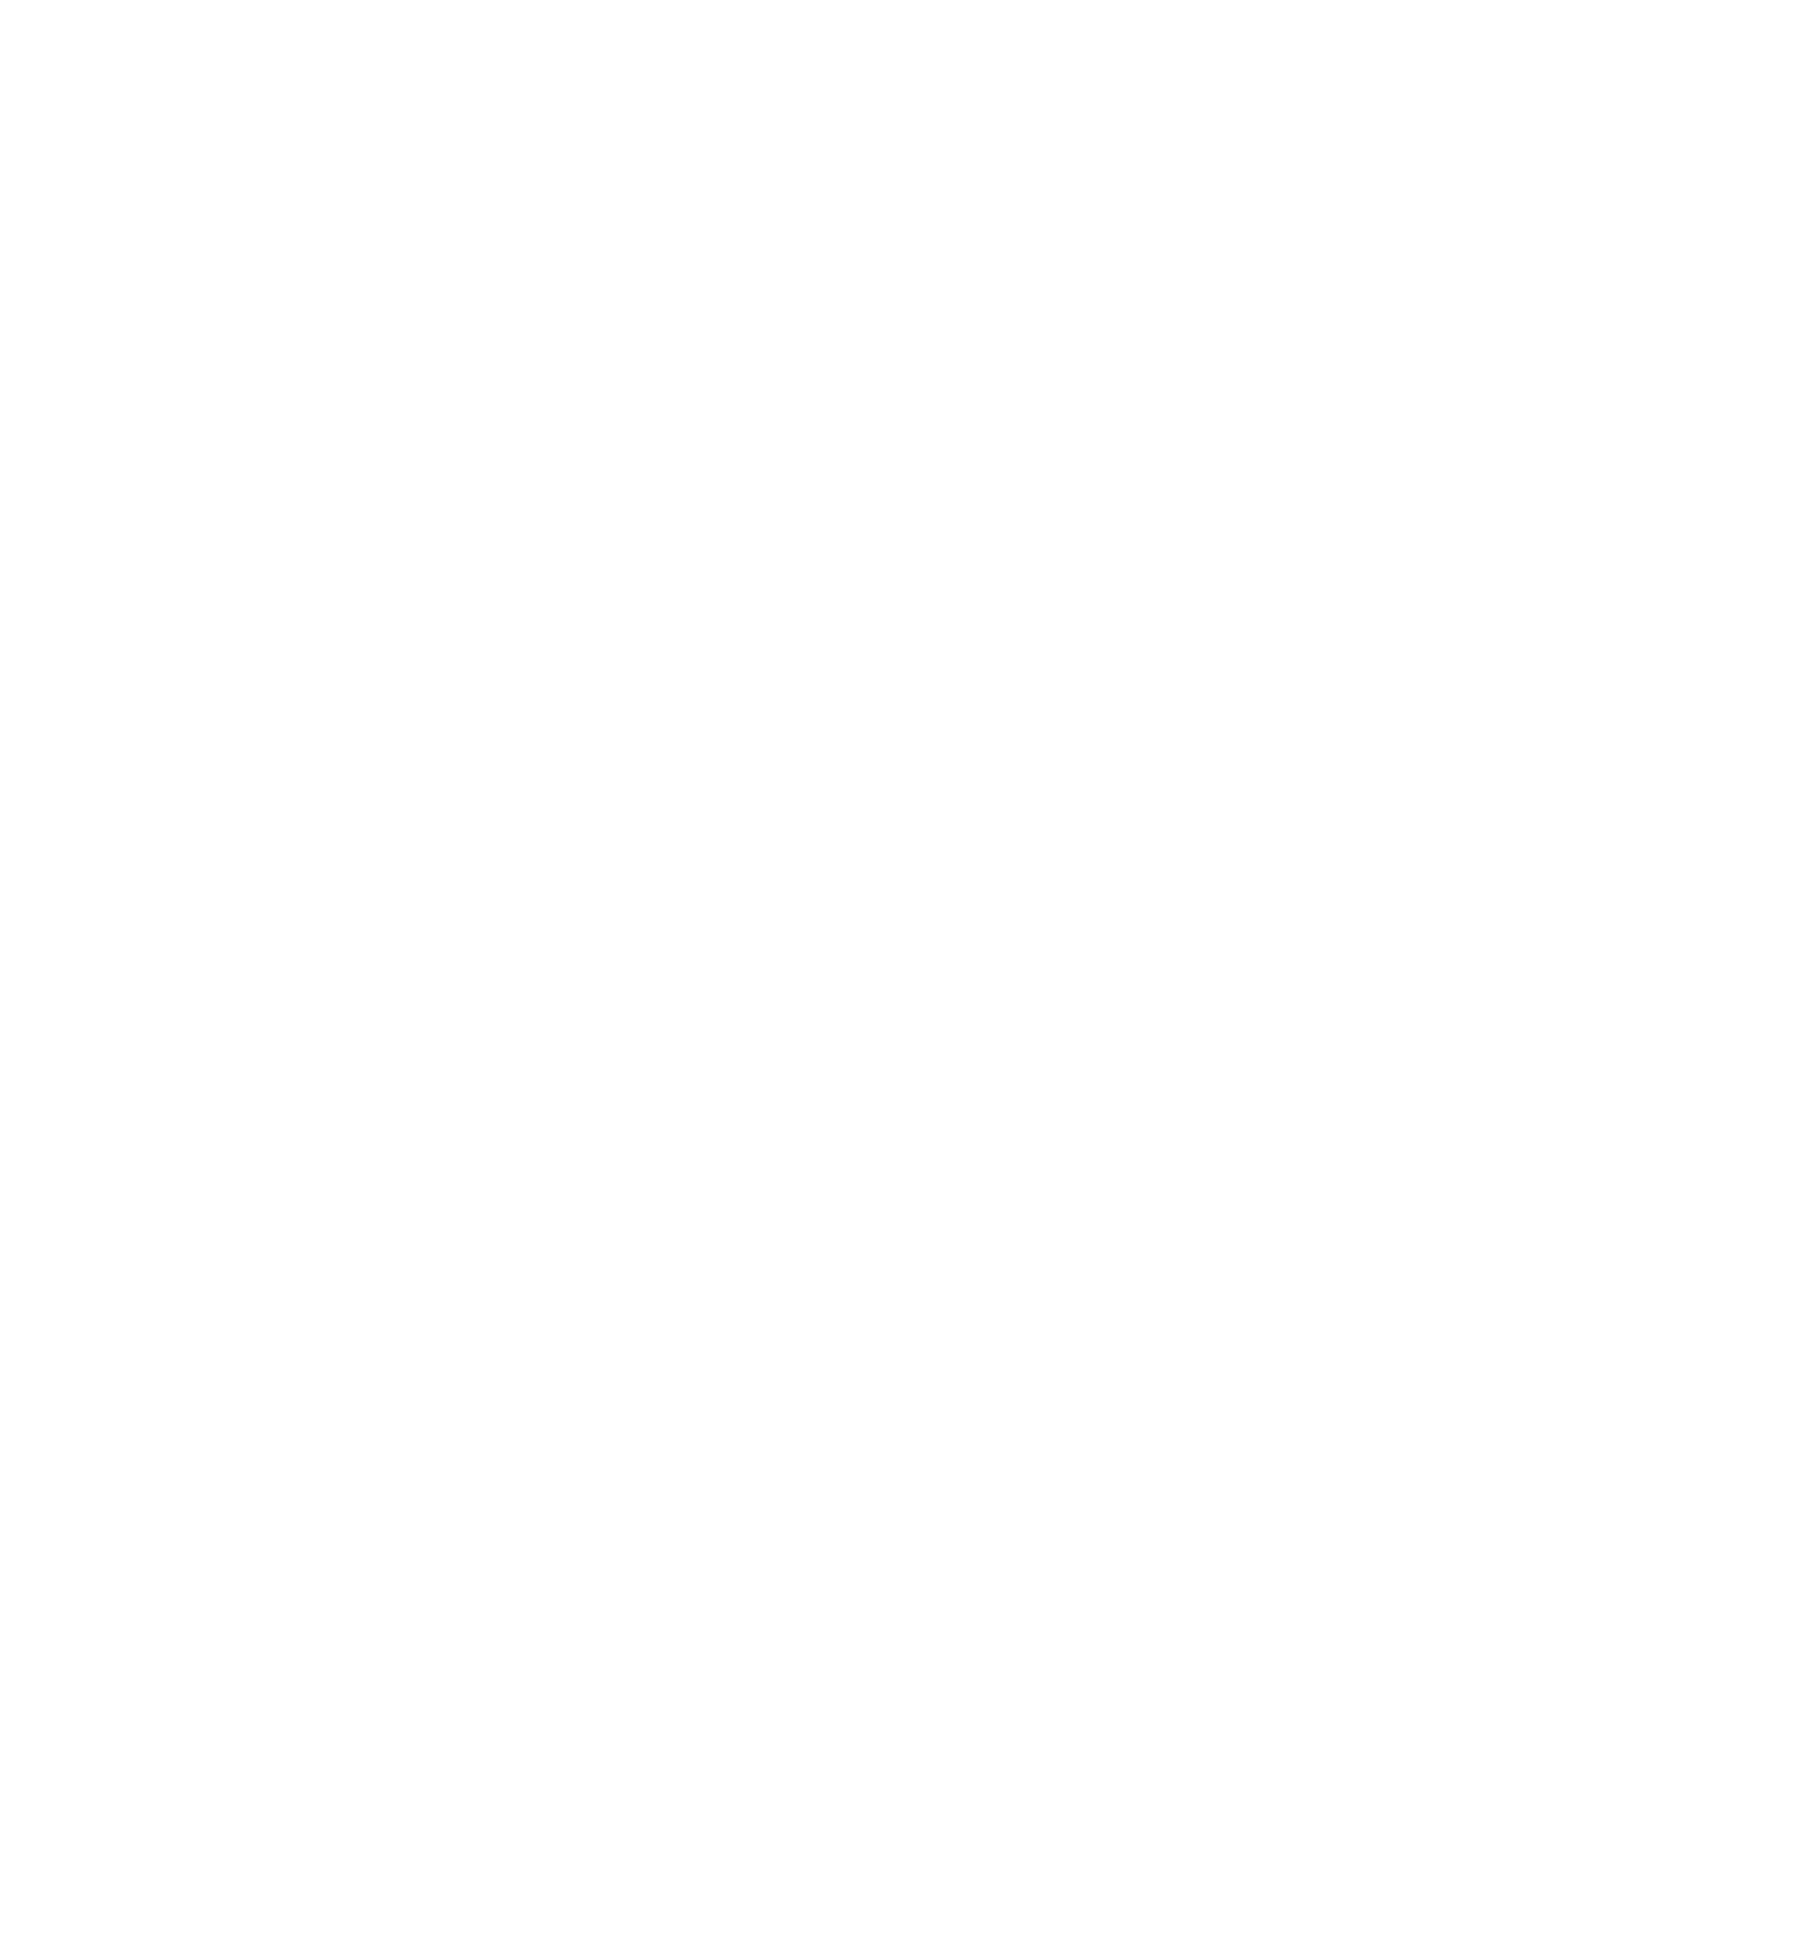 Brim Cafe and Catering, Milwaukee